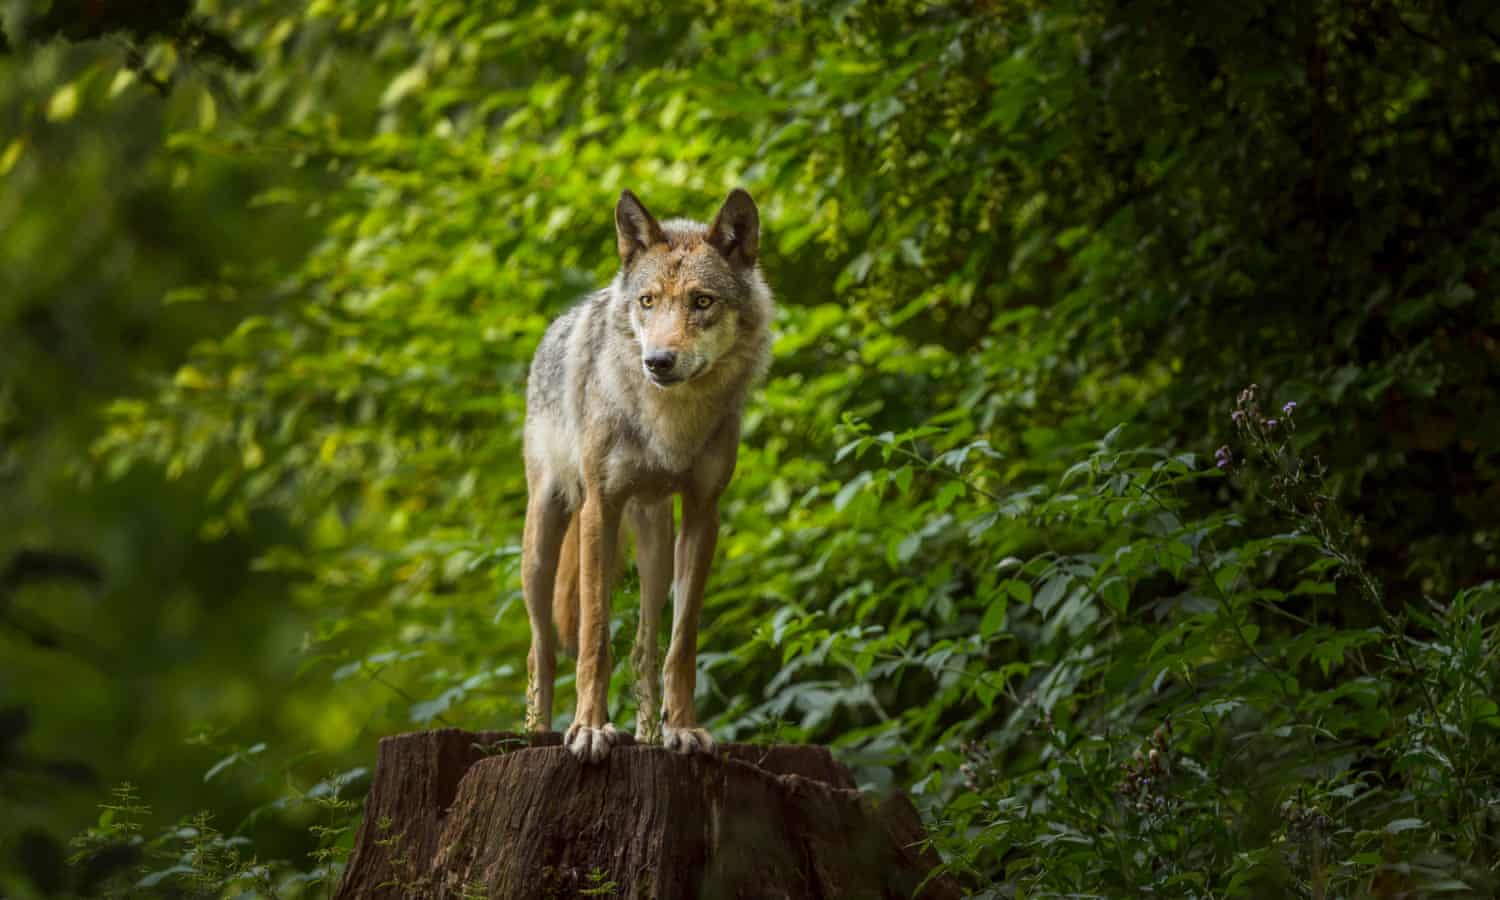 Wolf hunting could return to western Europe under EU plan